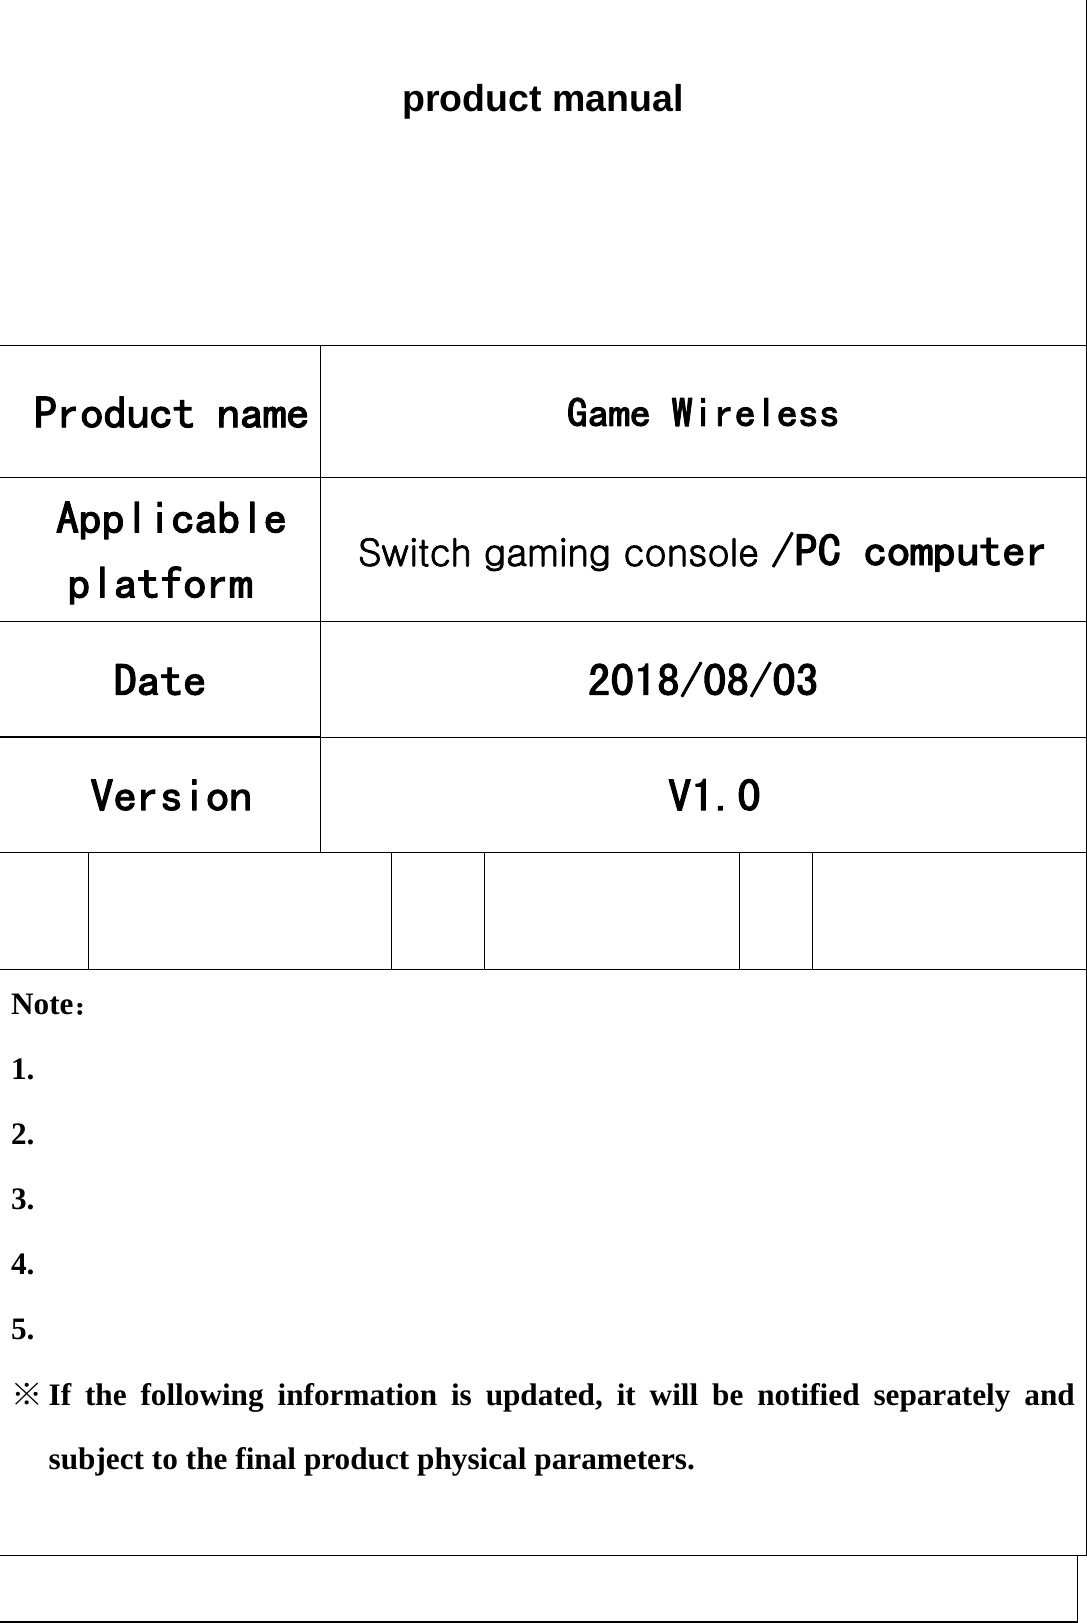  product manual Product name  Game Wireless Applicable platform  Switch gaming console /PC computer Date   2018/08/03 Version   V1.0           Note： 1. 2. 3. 4. 5. ※ If the following information is updated, it will be notified separately and subject to the final product physical parameters.   